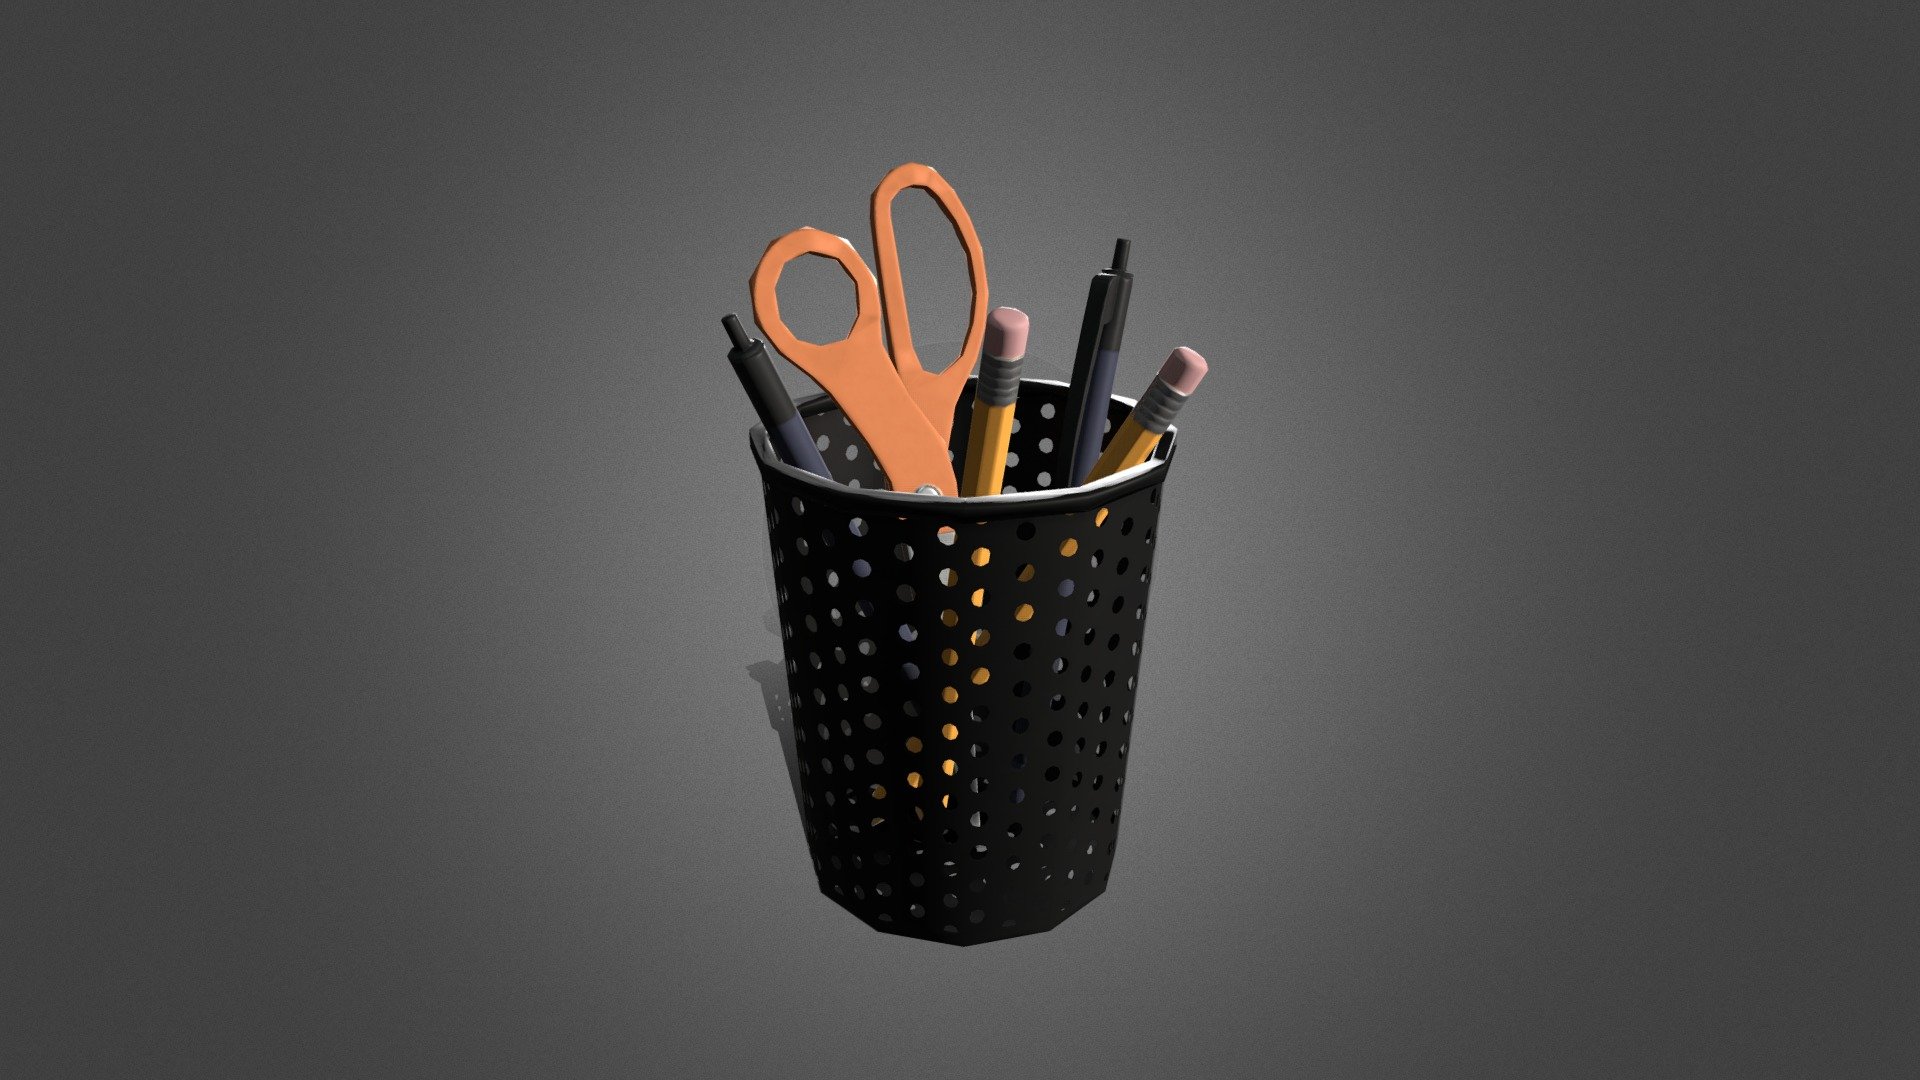 A low poly and simple style game asset 3d model